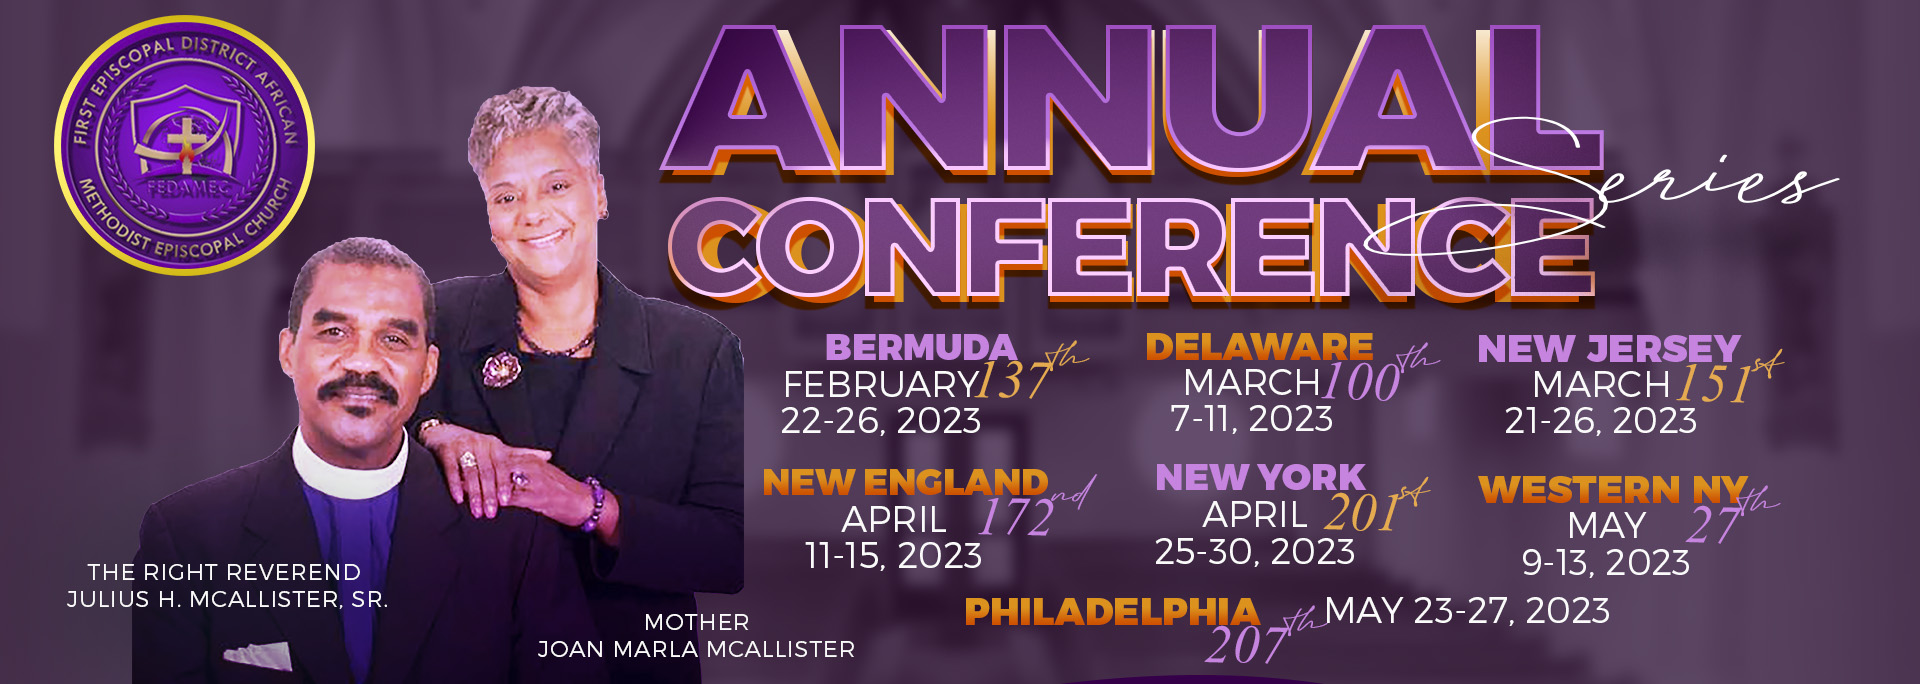 First District A.M.E.C. Annual Conference Schedule